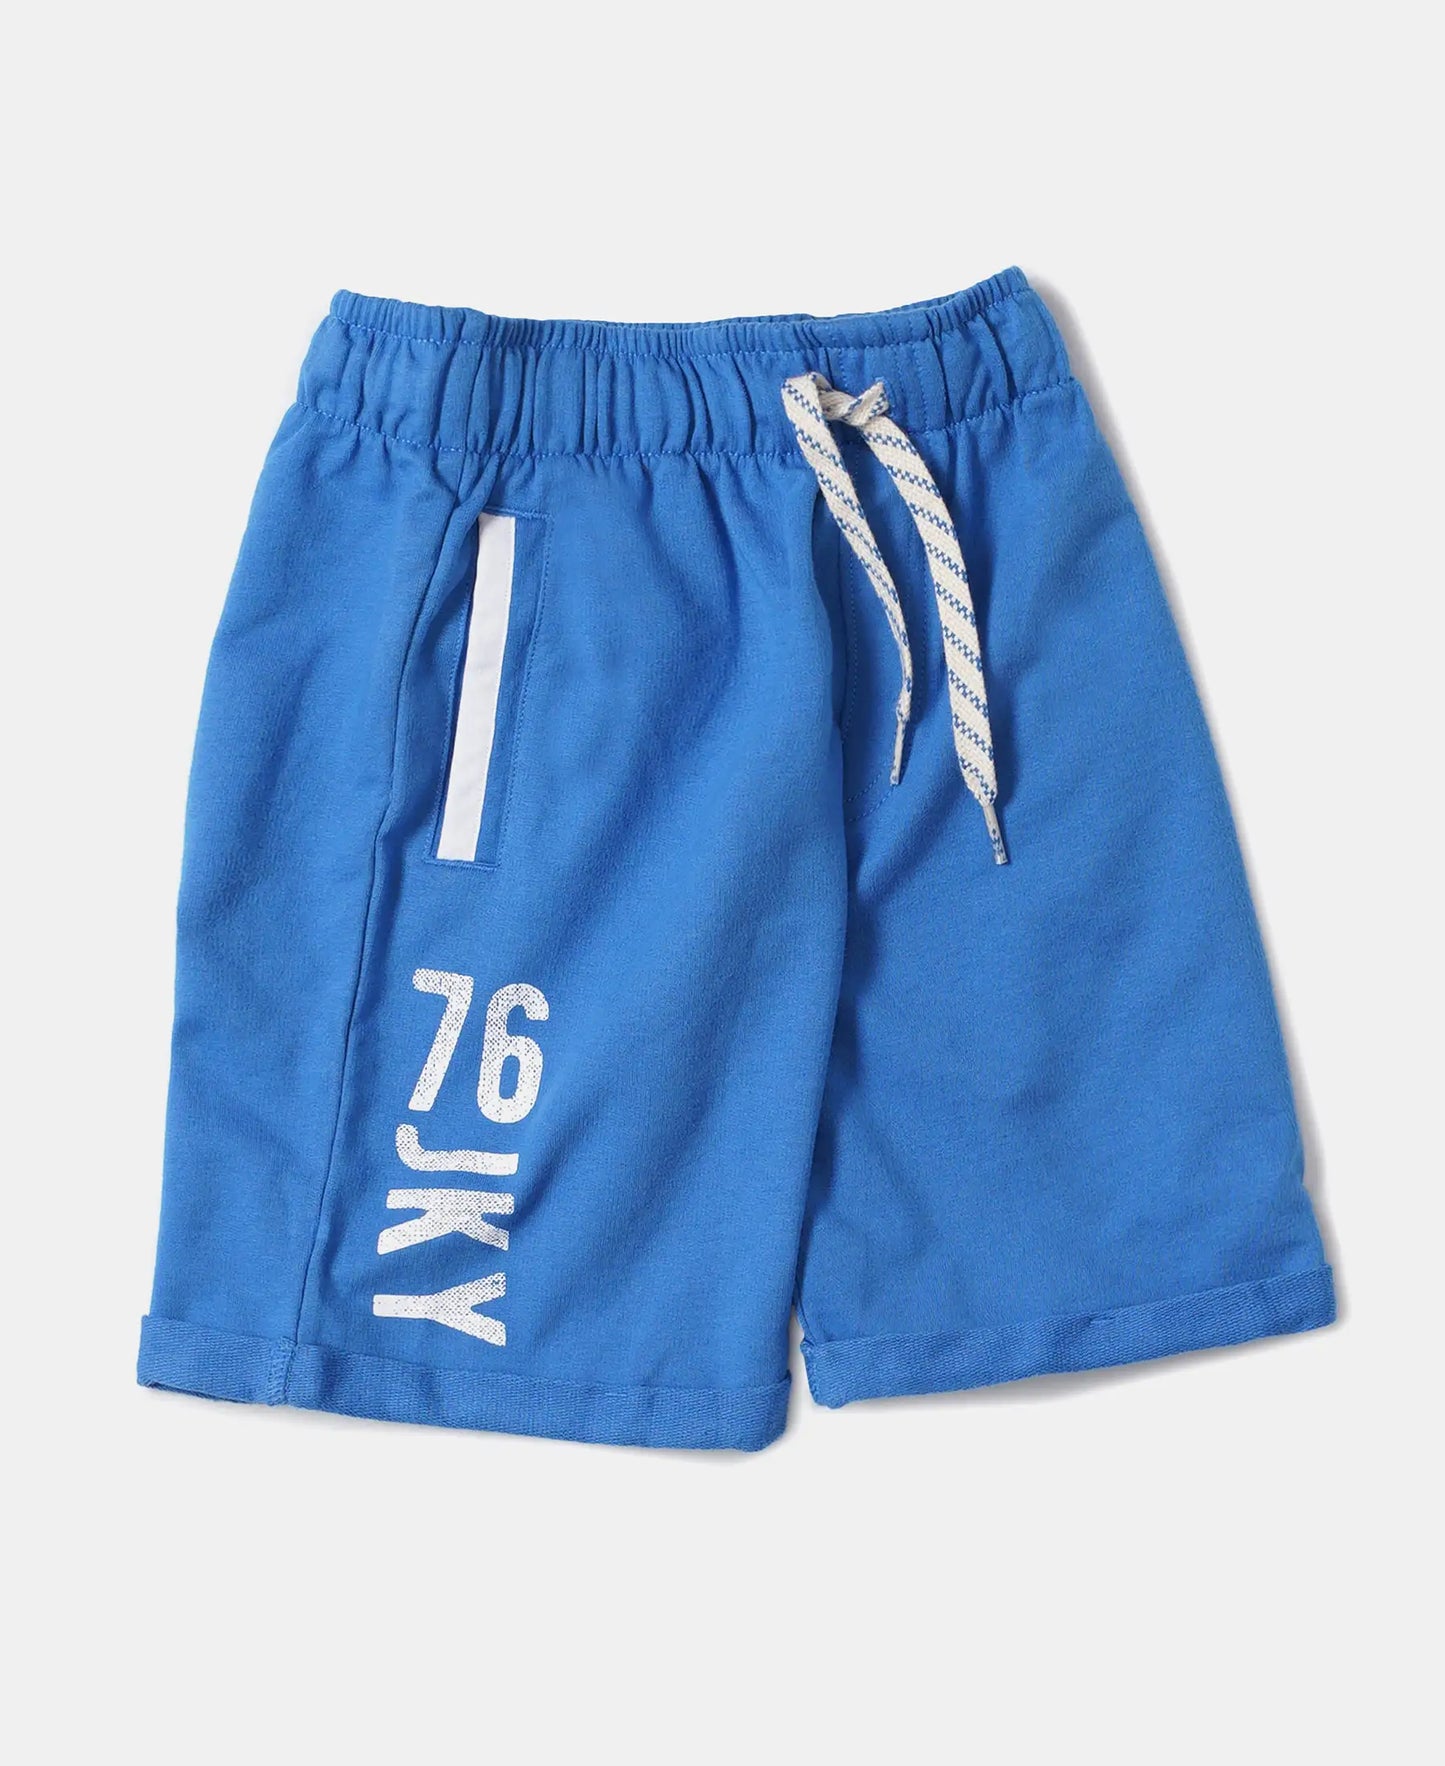 Super Combed Cotton Rich French Terry Graphic Printed Shorts with Turn Up Hem Styling - Palace Blue-5